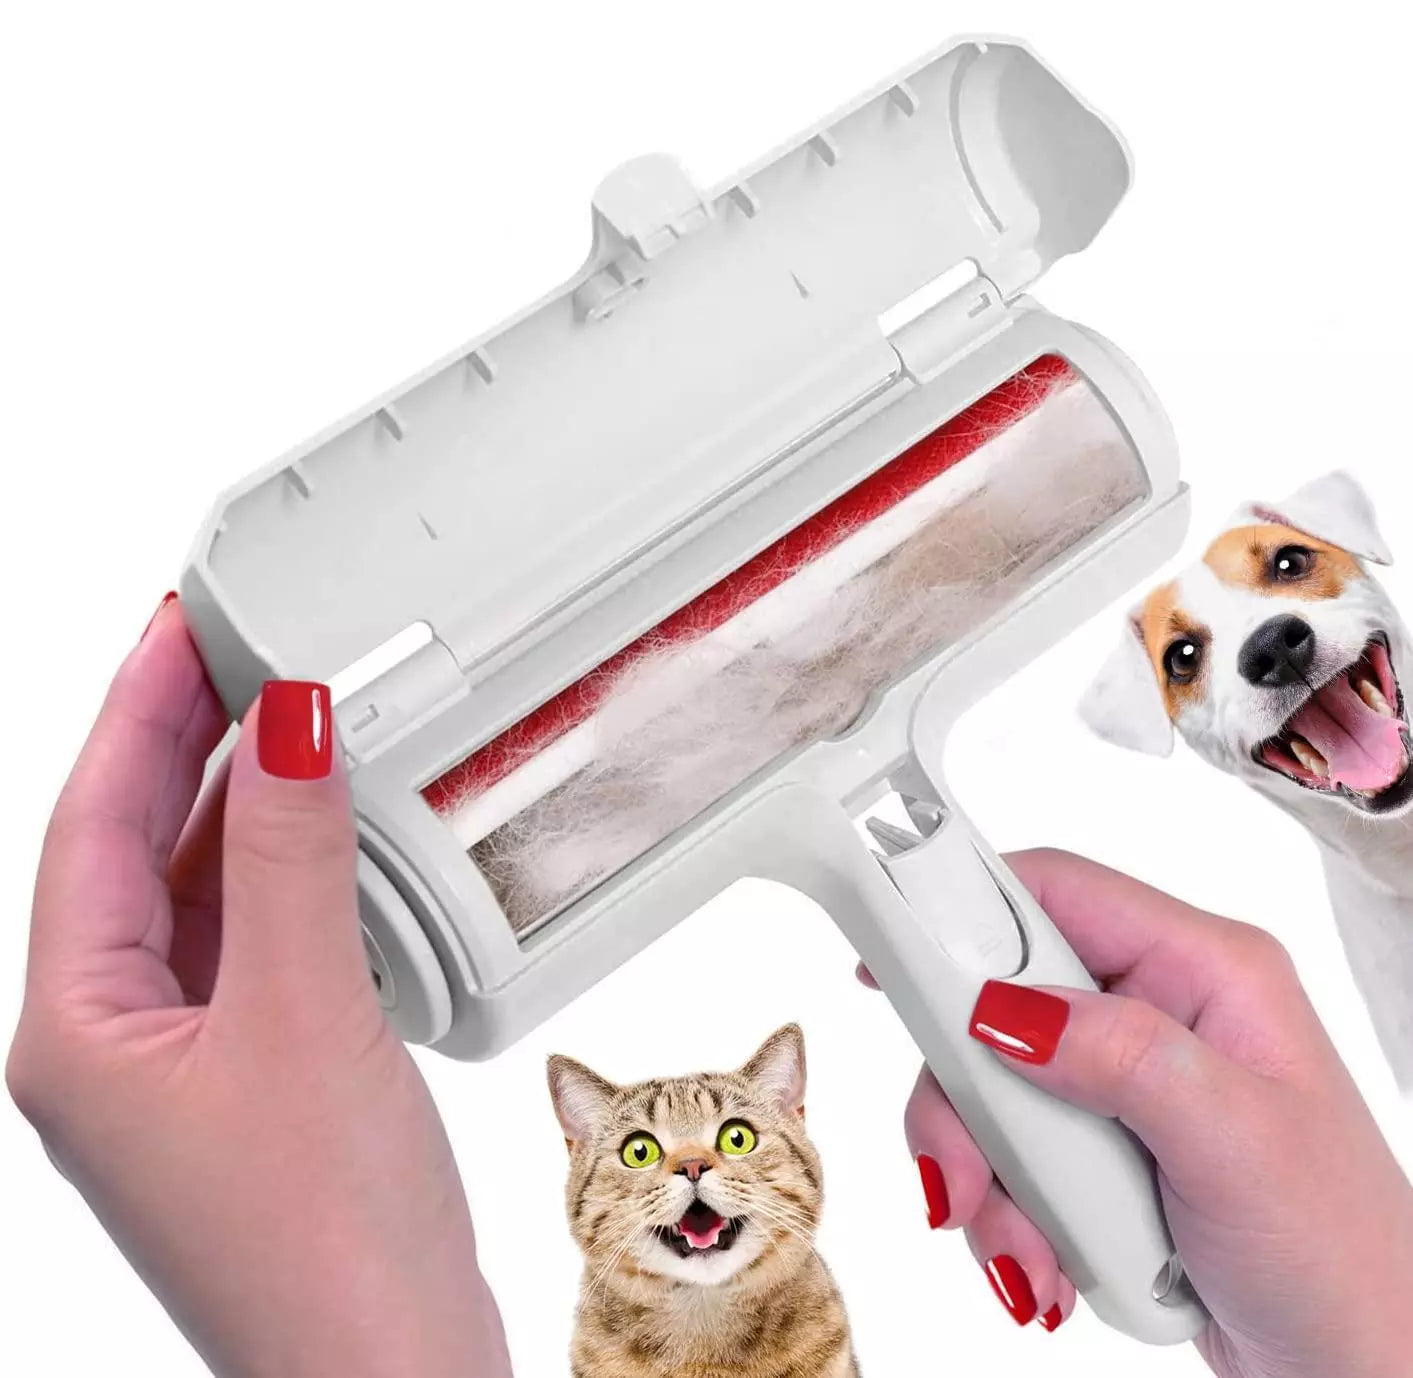 Pet Hair Roller: Self-Cleaning Fur Remover for Dogs & Cats - Efficient Tool  ourlum.com   